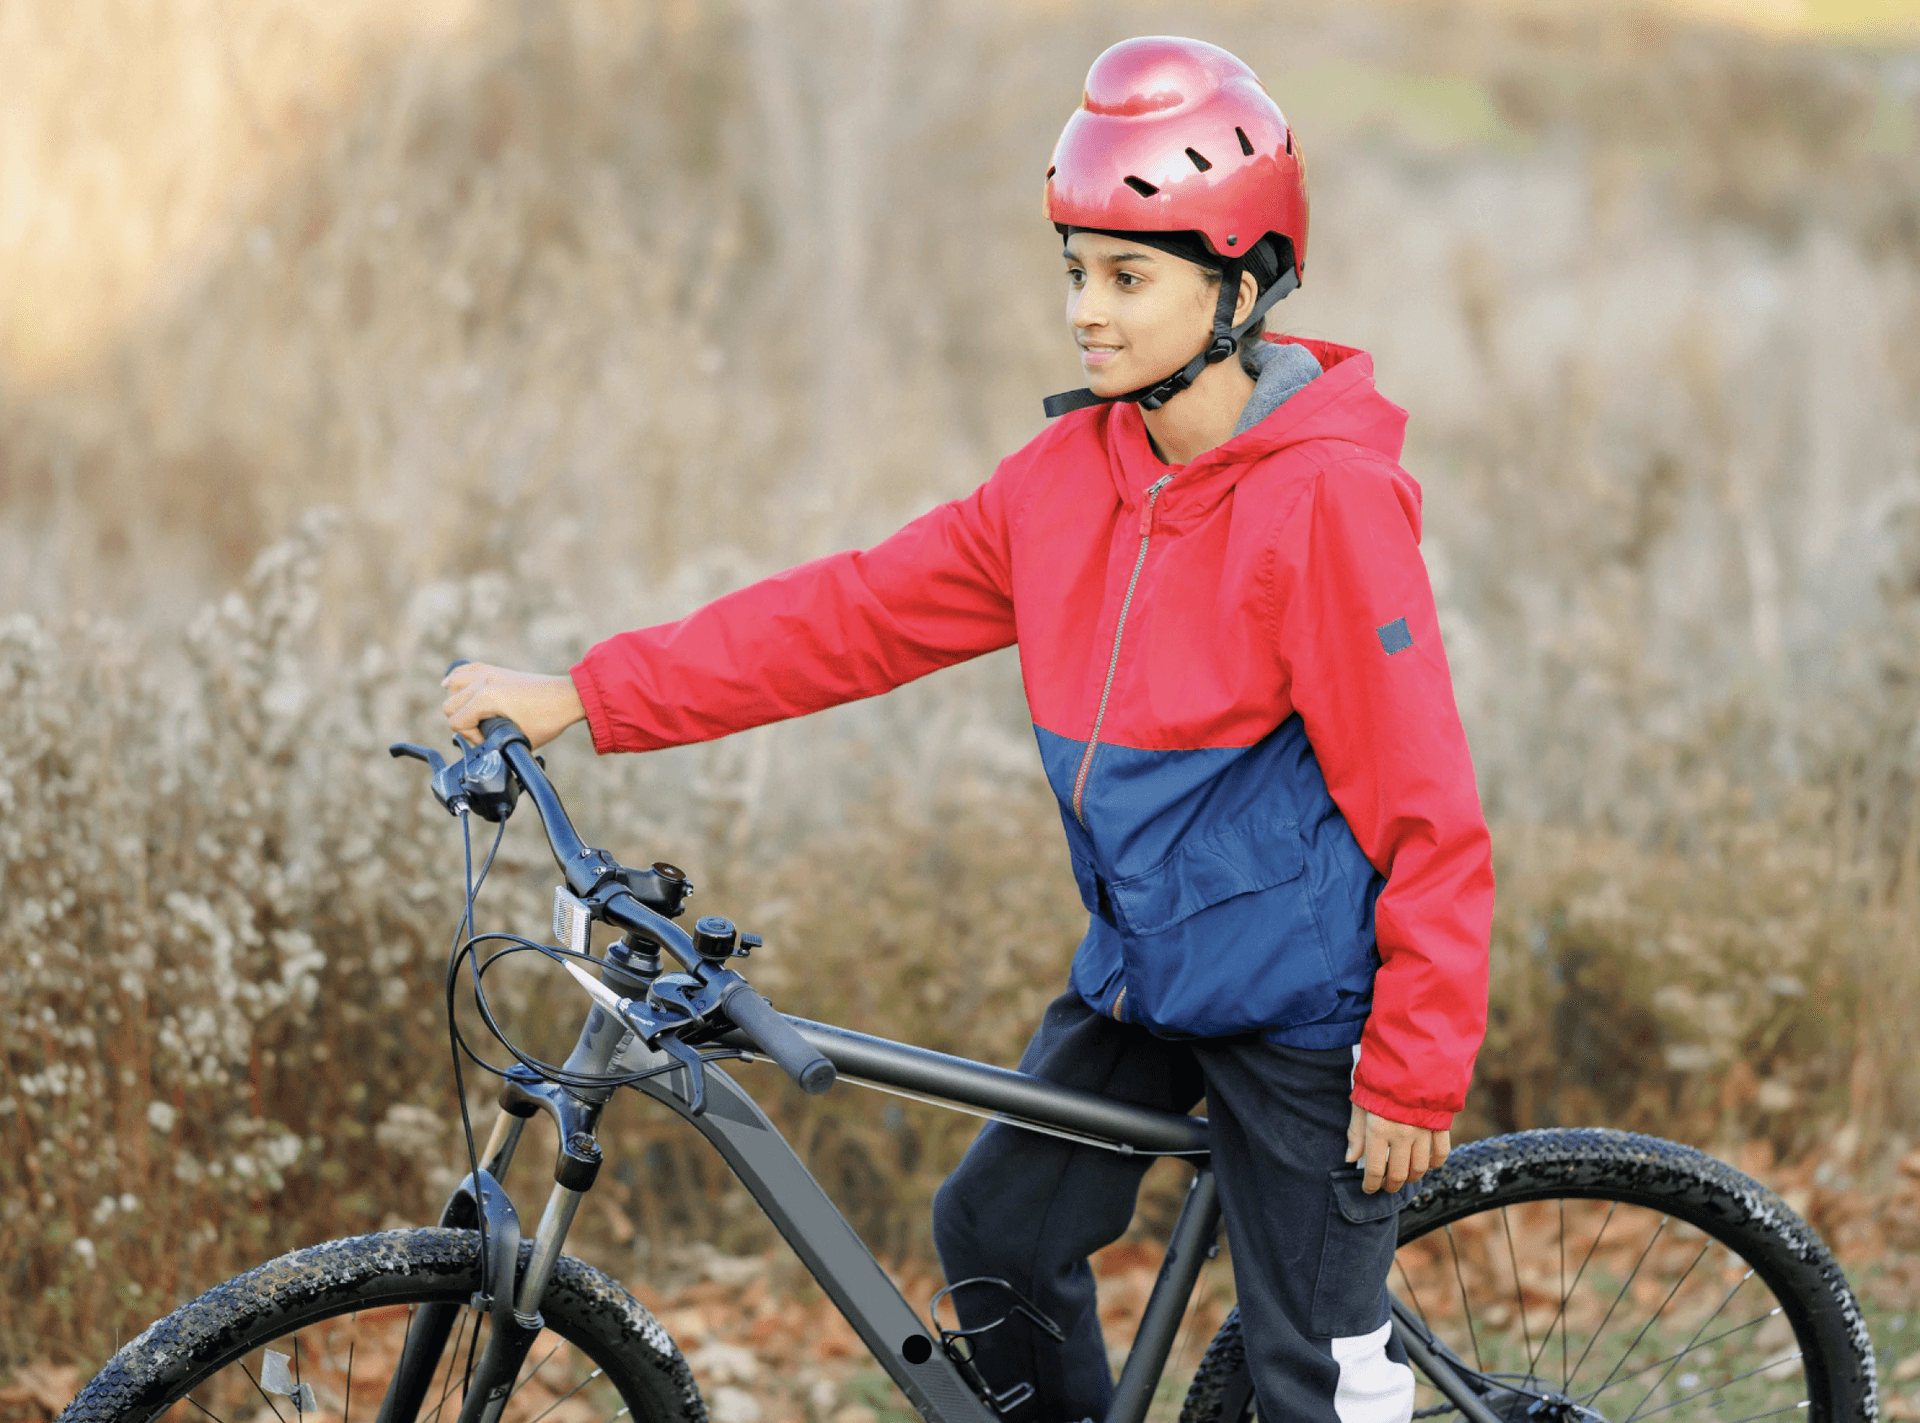 A child wearing a Bold Helmet designed by Tina Singh for Sikh kids.